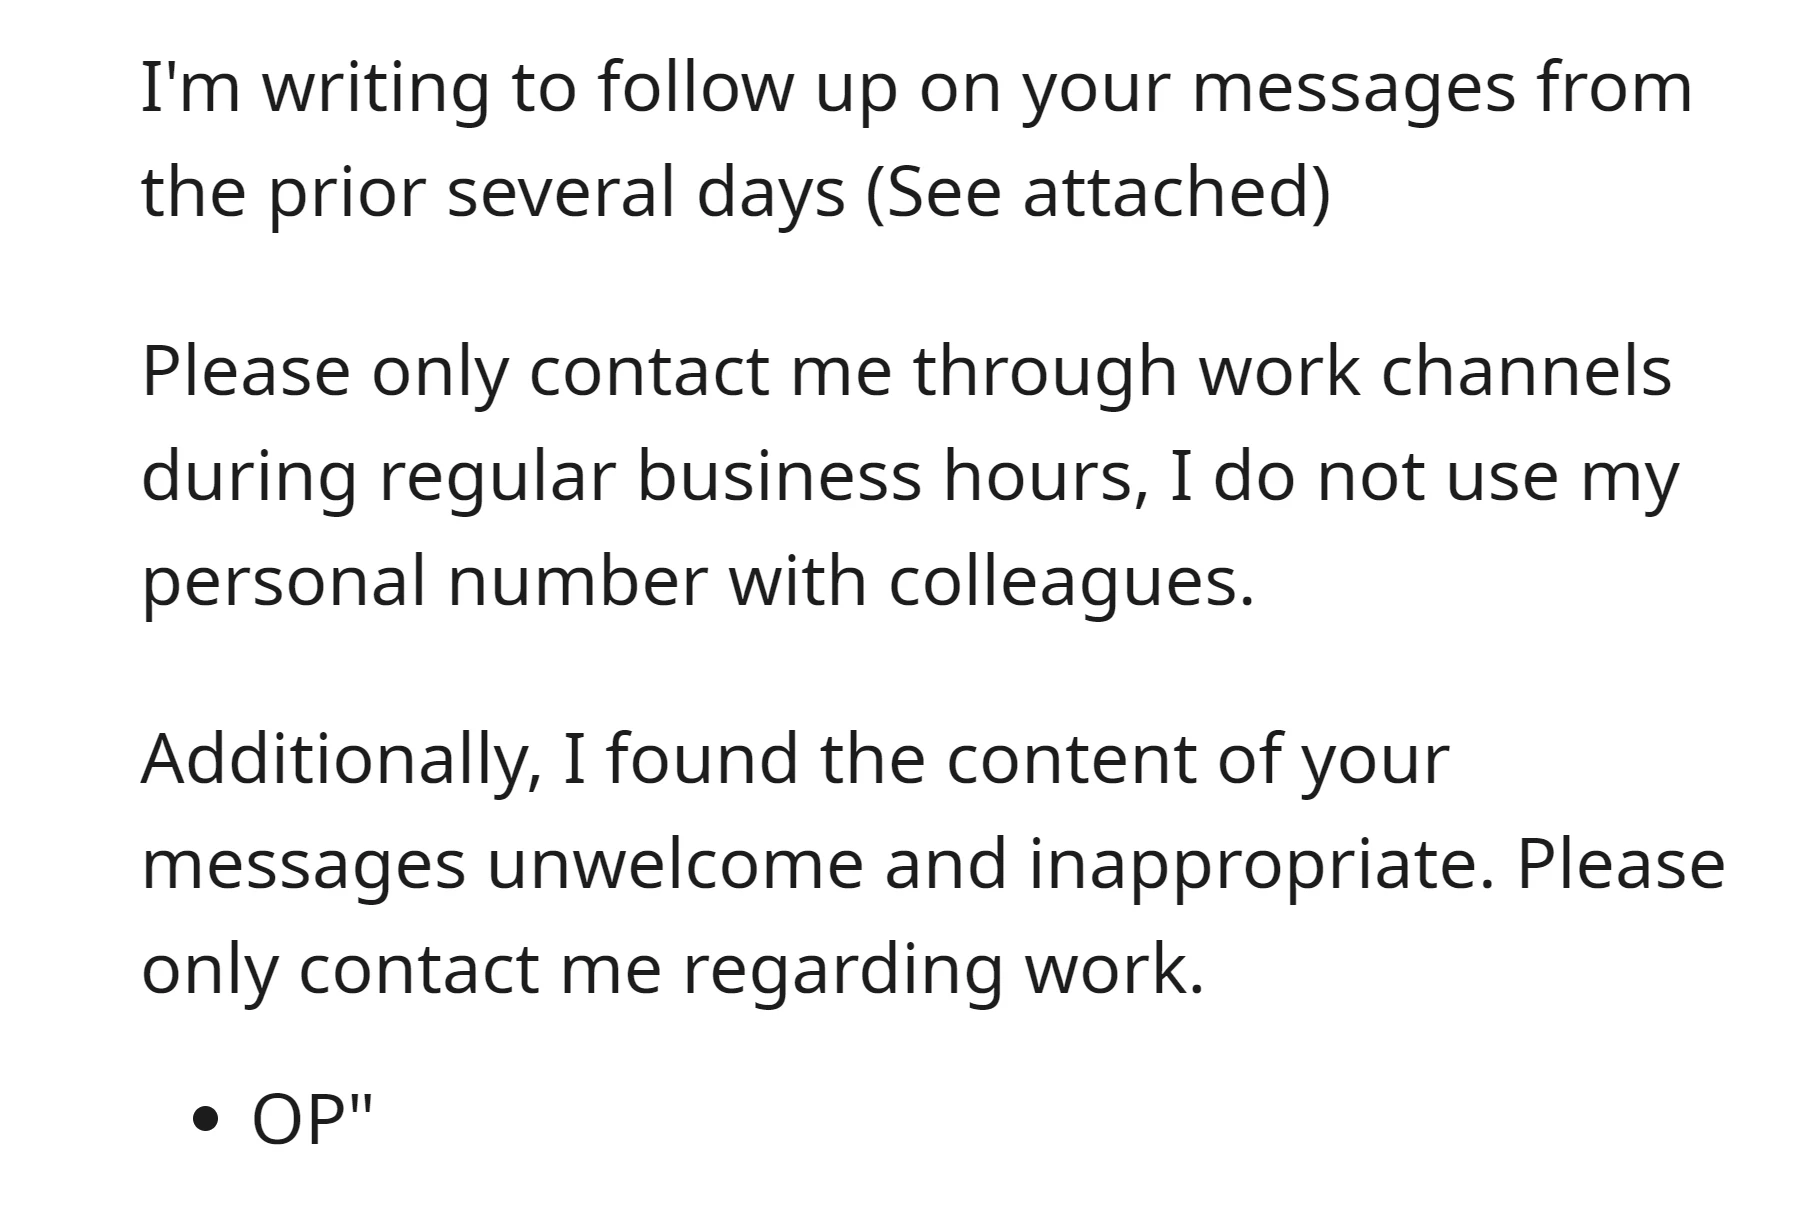 OP emailed the coworker to express discomfort with the inappropriate messages